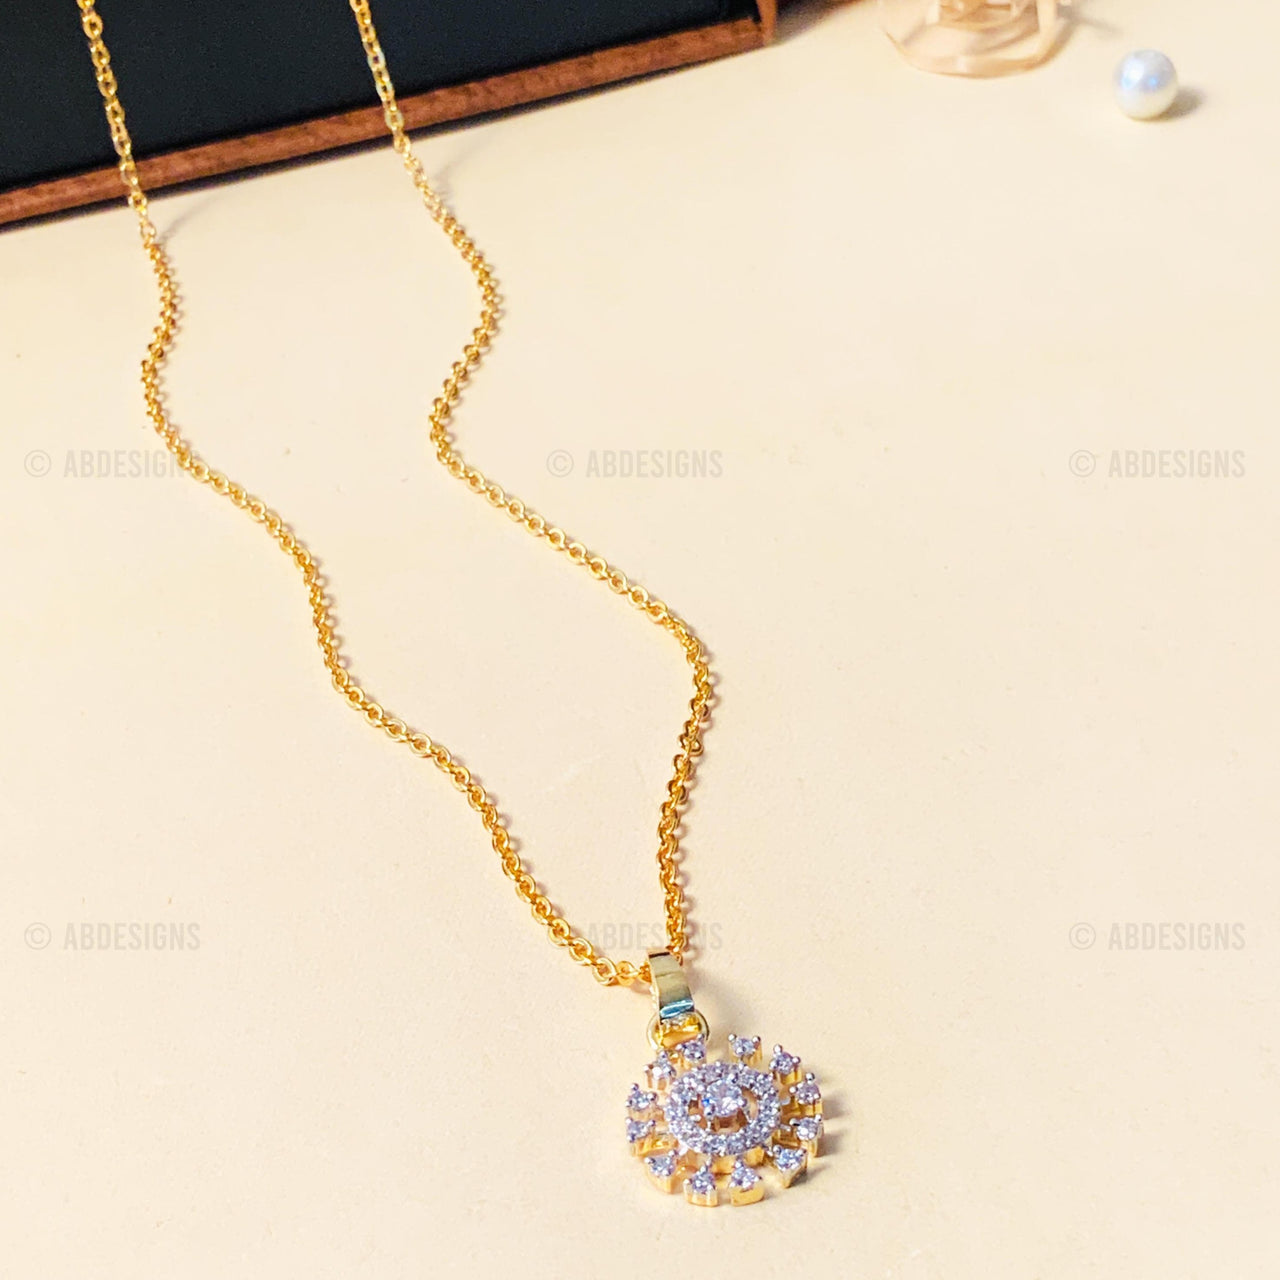 High-Quality Sophisticated Gold Plated Pendant Chain